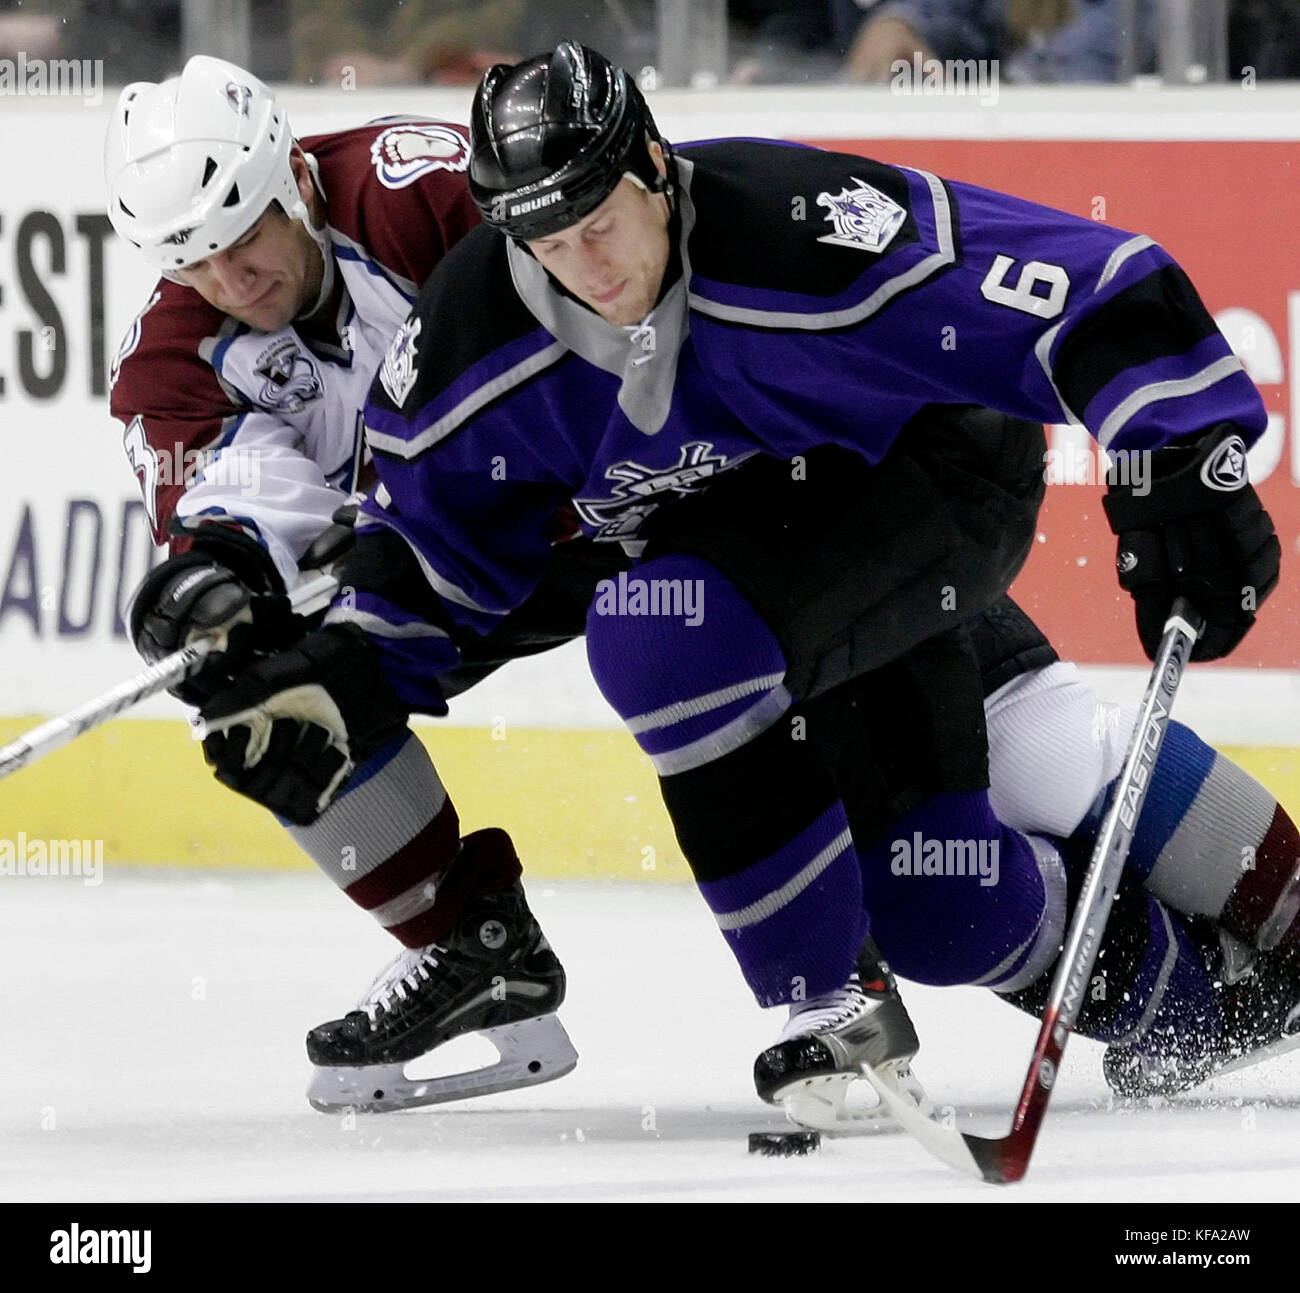 Los Angeles Kings' Bob Boughner, right, wards off Colorado Avalanche's Michael Cammalleri from the puck in the second period of an NHL hockey game in Los Angeles on Monday, March 20, 2006. Colorado won, 5-0. Photo by Francis Specker Stock Photo